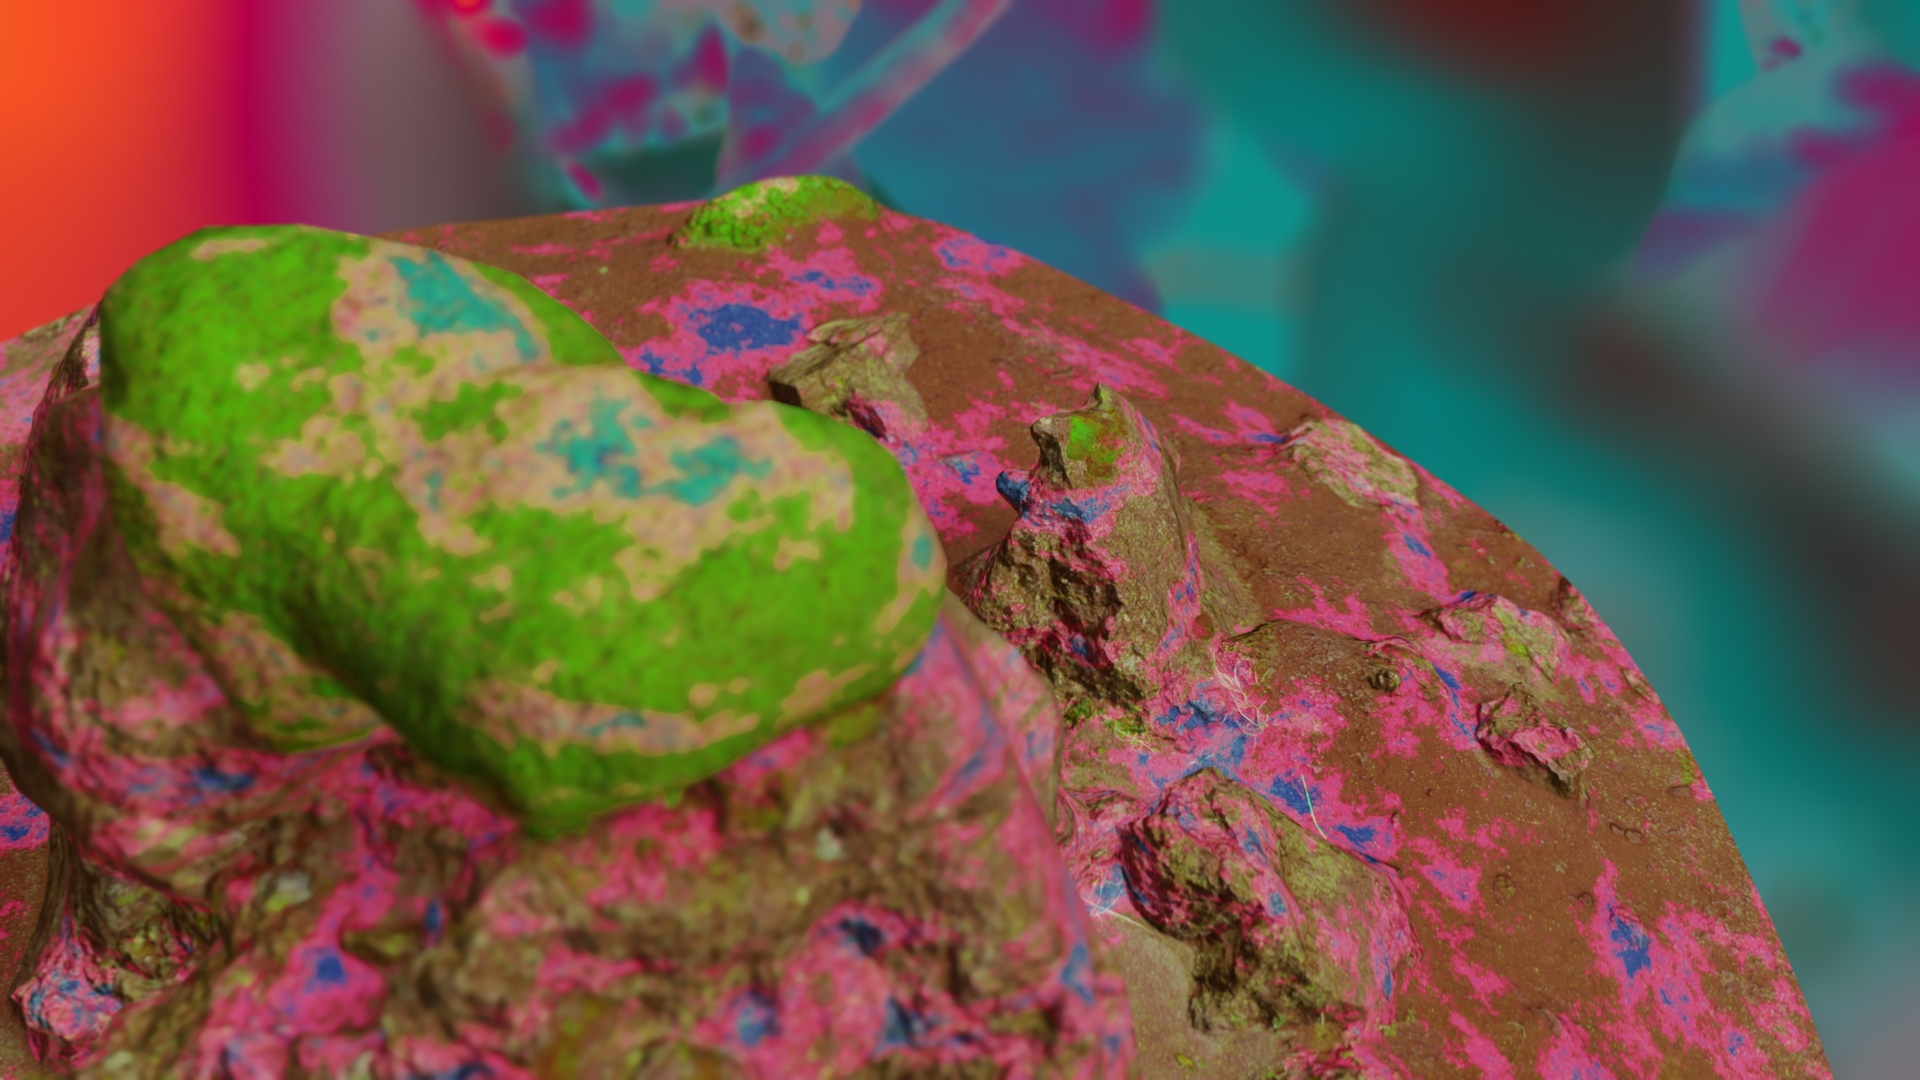 A 3-D digital design of a brown rock with vibrant pink and blue paint-like splatters across it. A smaller green rock sits on top of it.